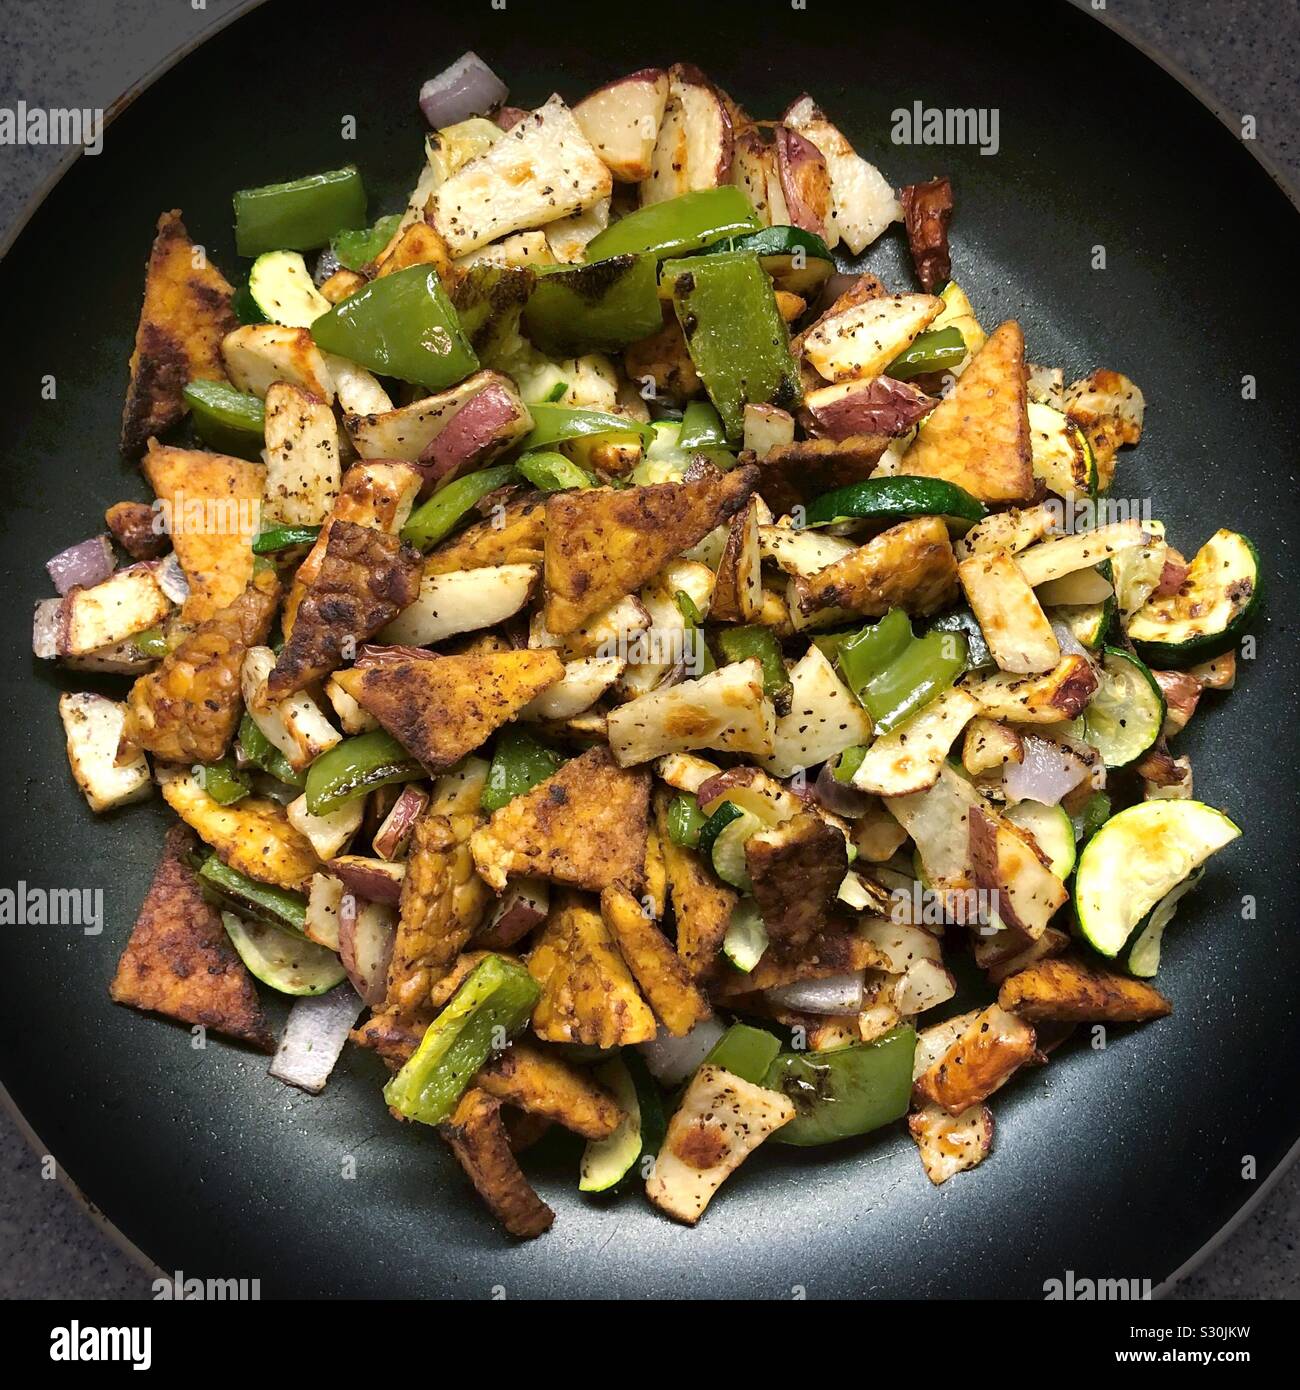 Roasted veggies and tempeh in a skillet. Stock Photo